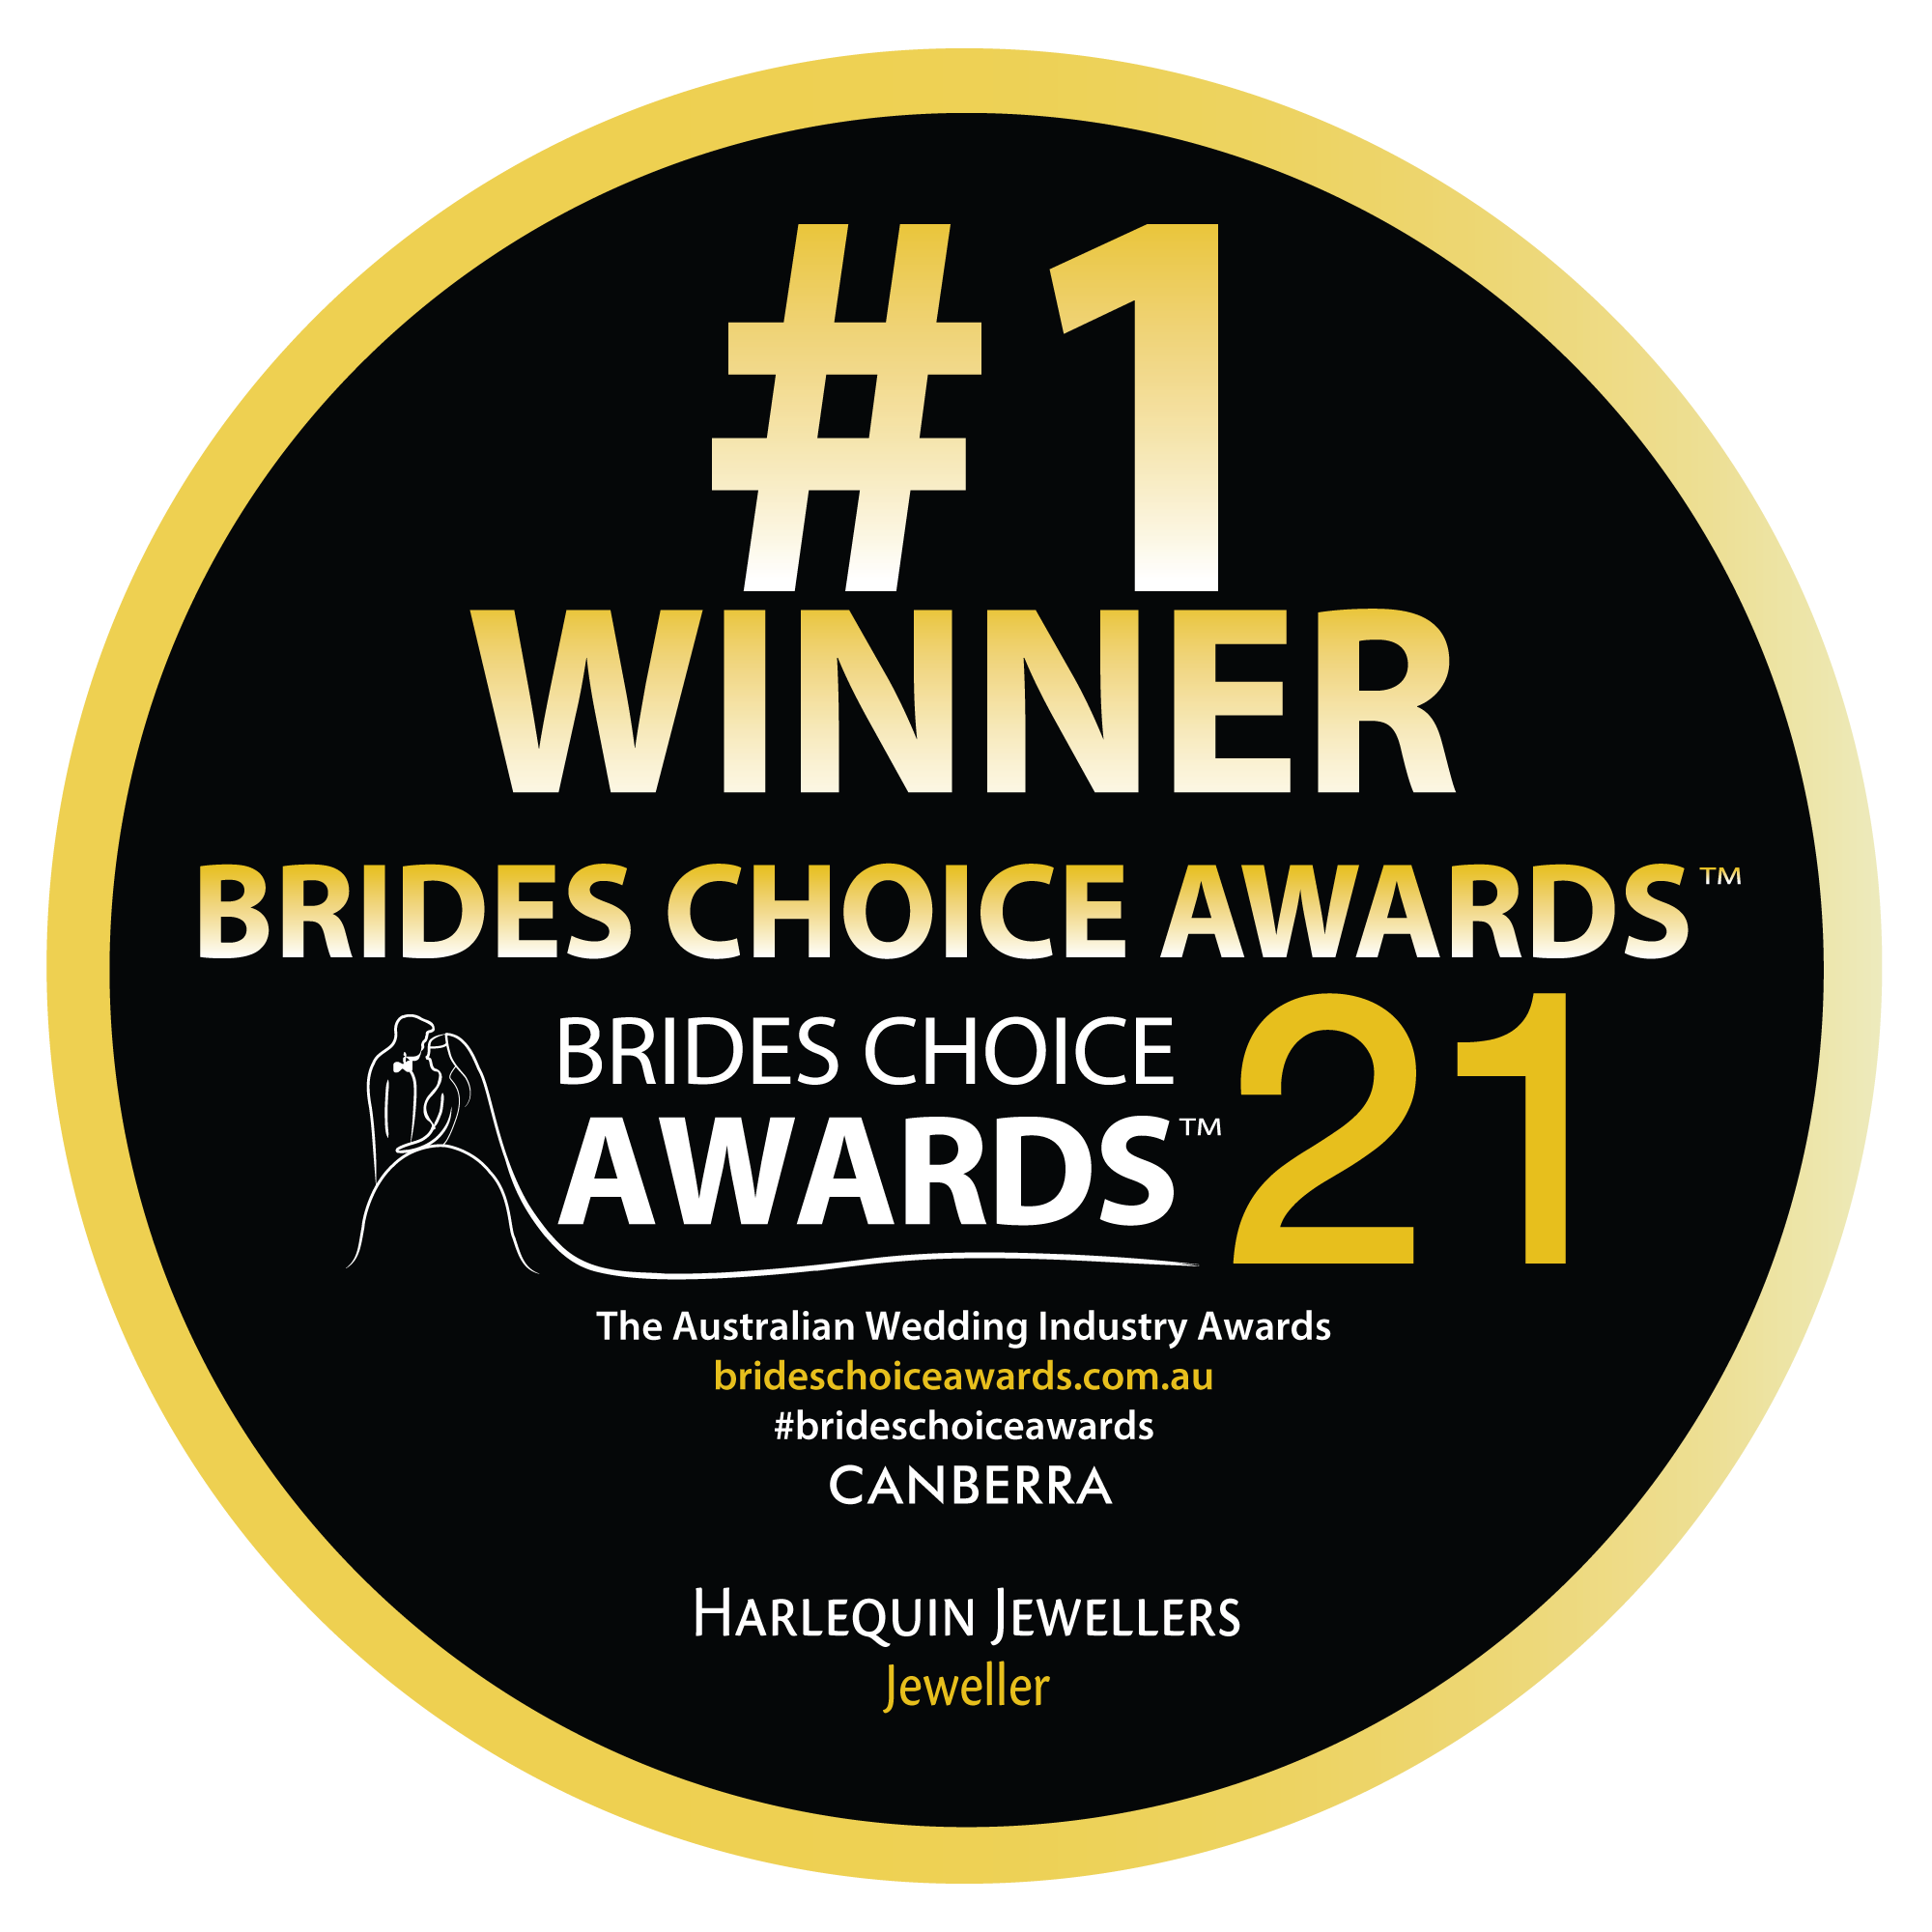 Brides Choice Awards Canberra jeweller category winner 2021 Harlequin Jewellers